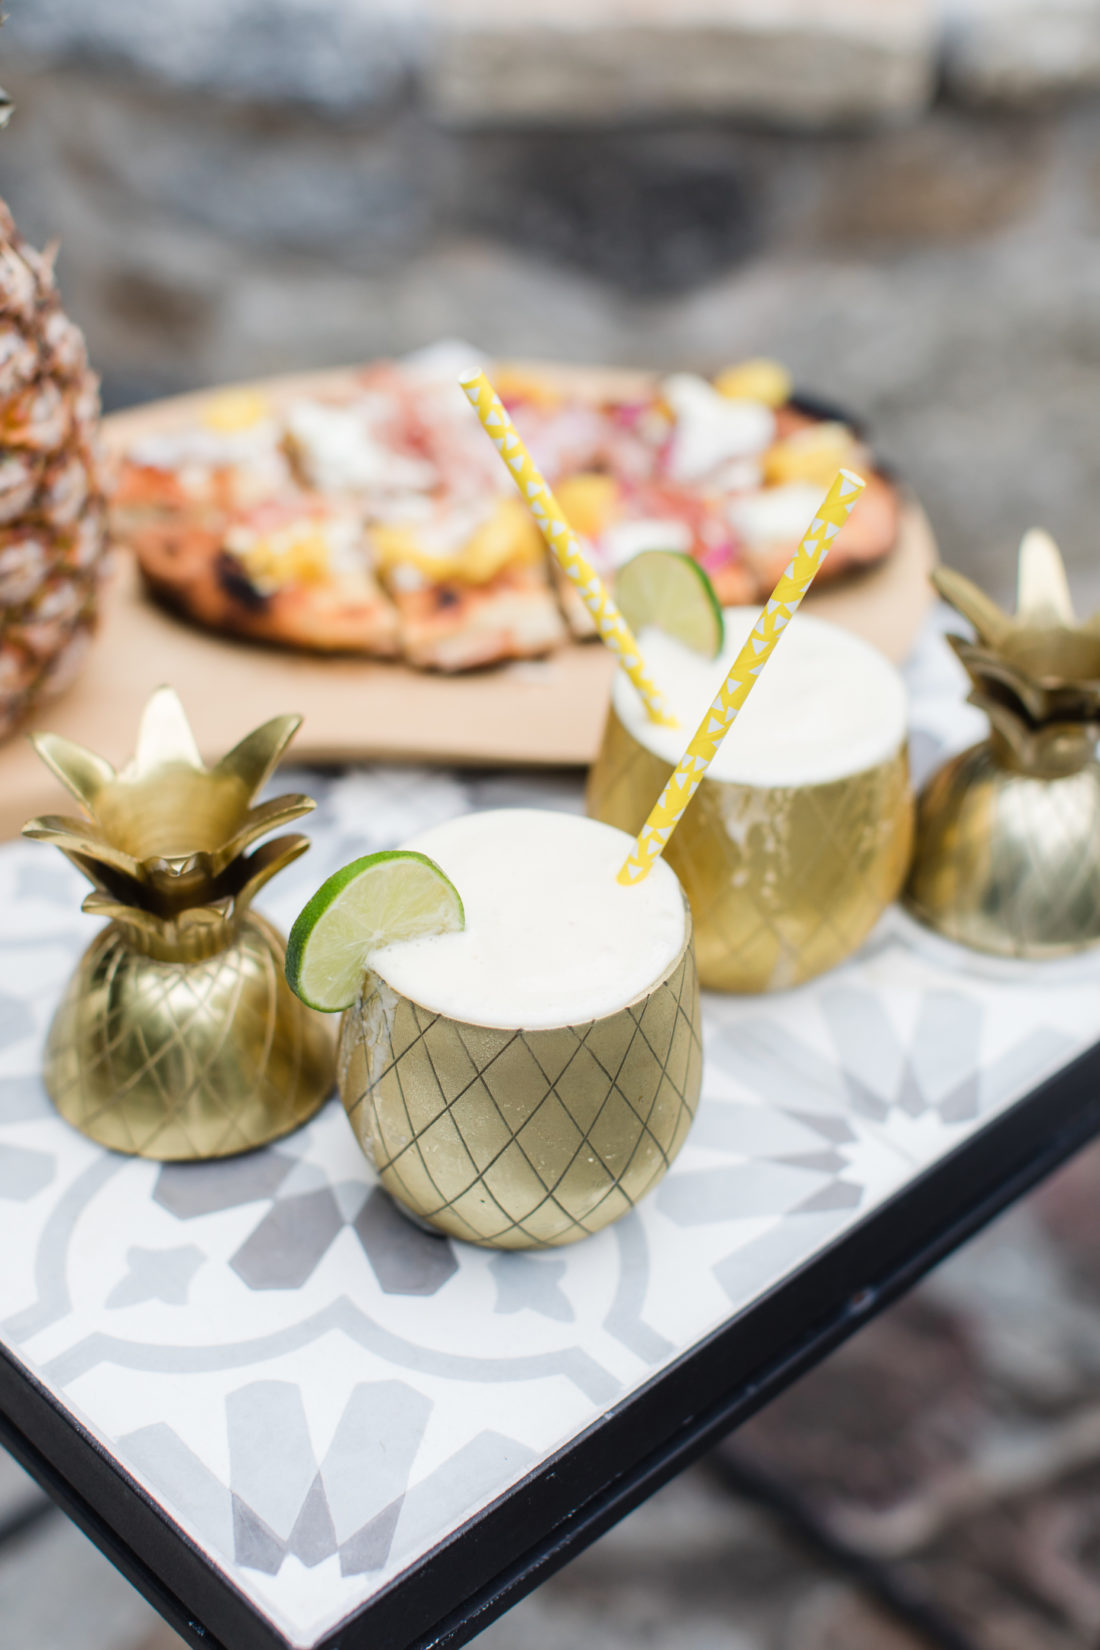 Eva Amurri Martino serves frozen Pineapple daquiris and a grilled hawaiian pizza at a Pineapple-themed happy hour at her Connecticut home